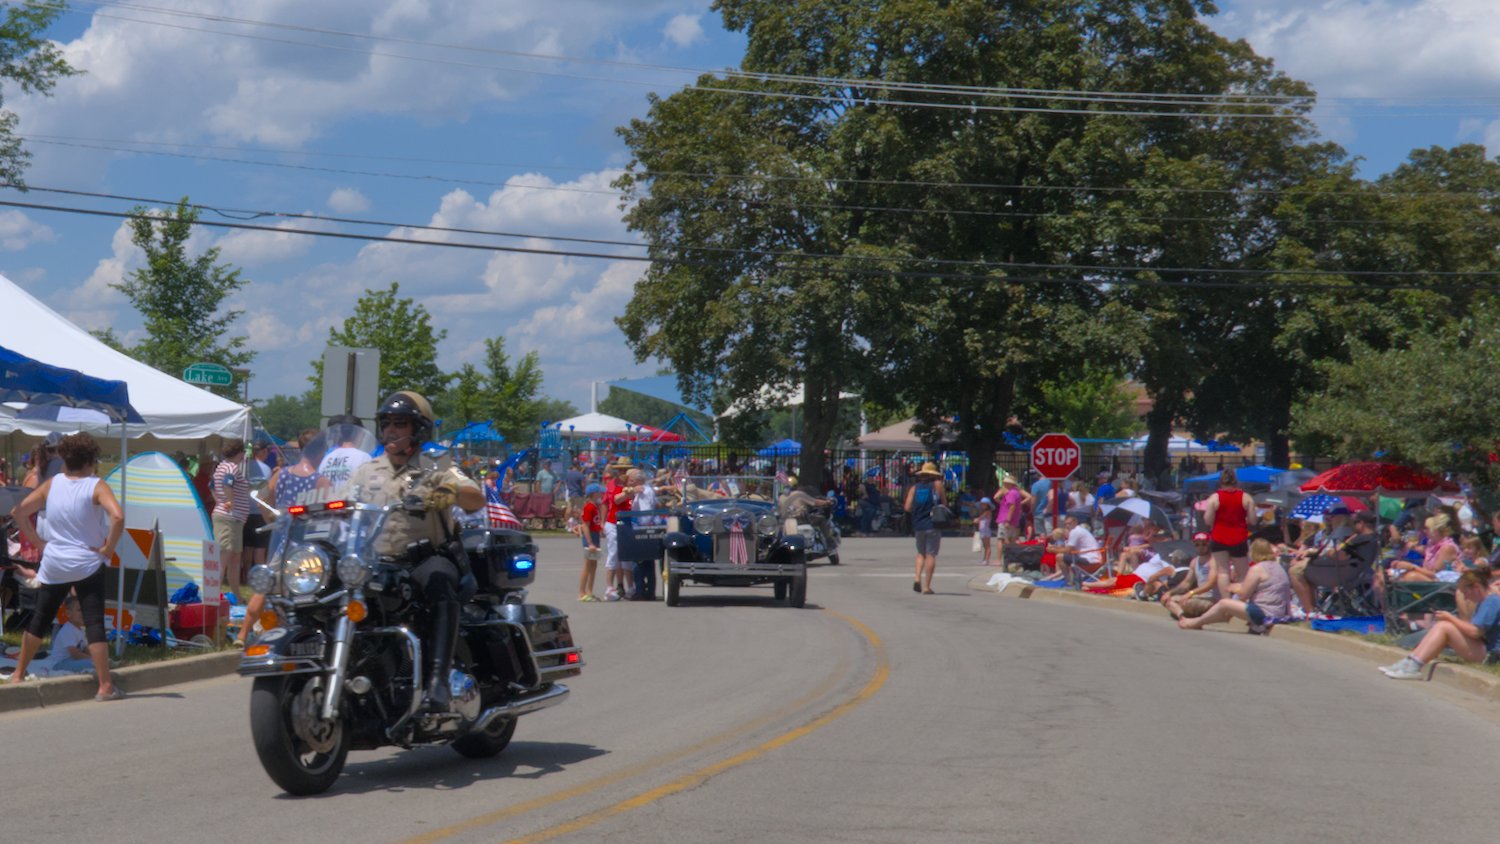 Police motorcycle, with Jim Athans dropping off Grand Marshall Kathryn Martens in the background.